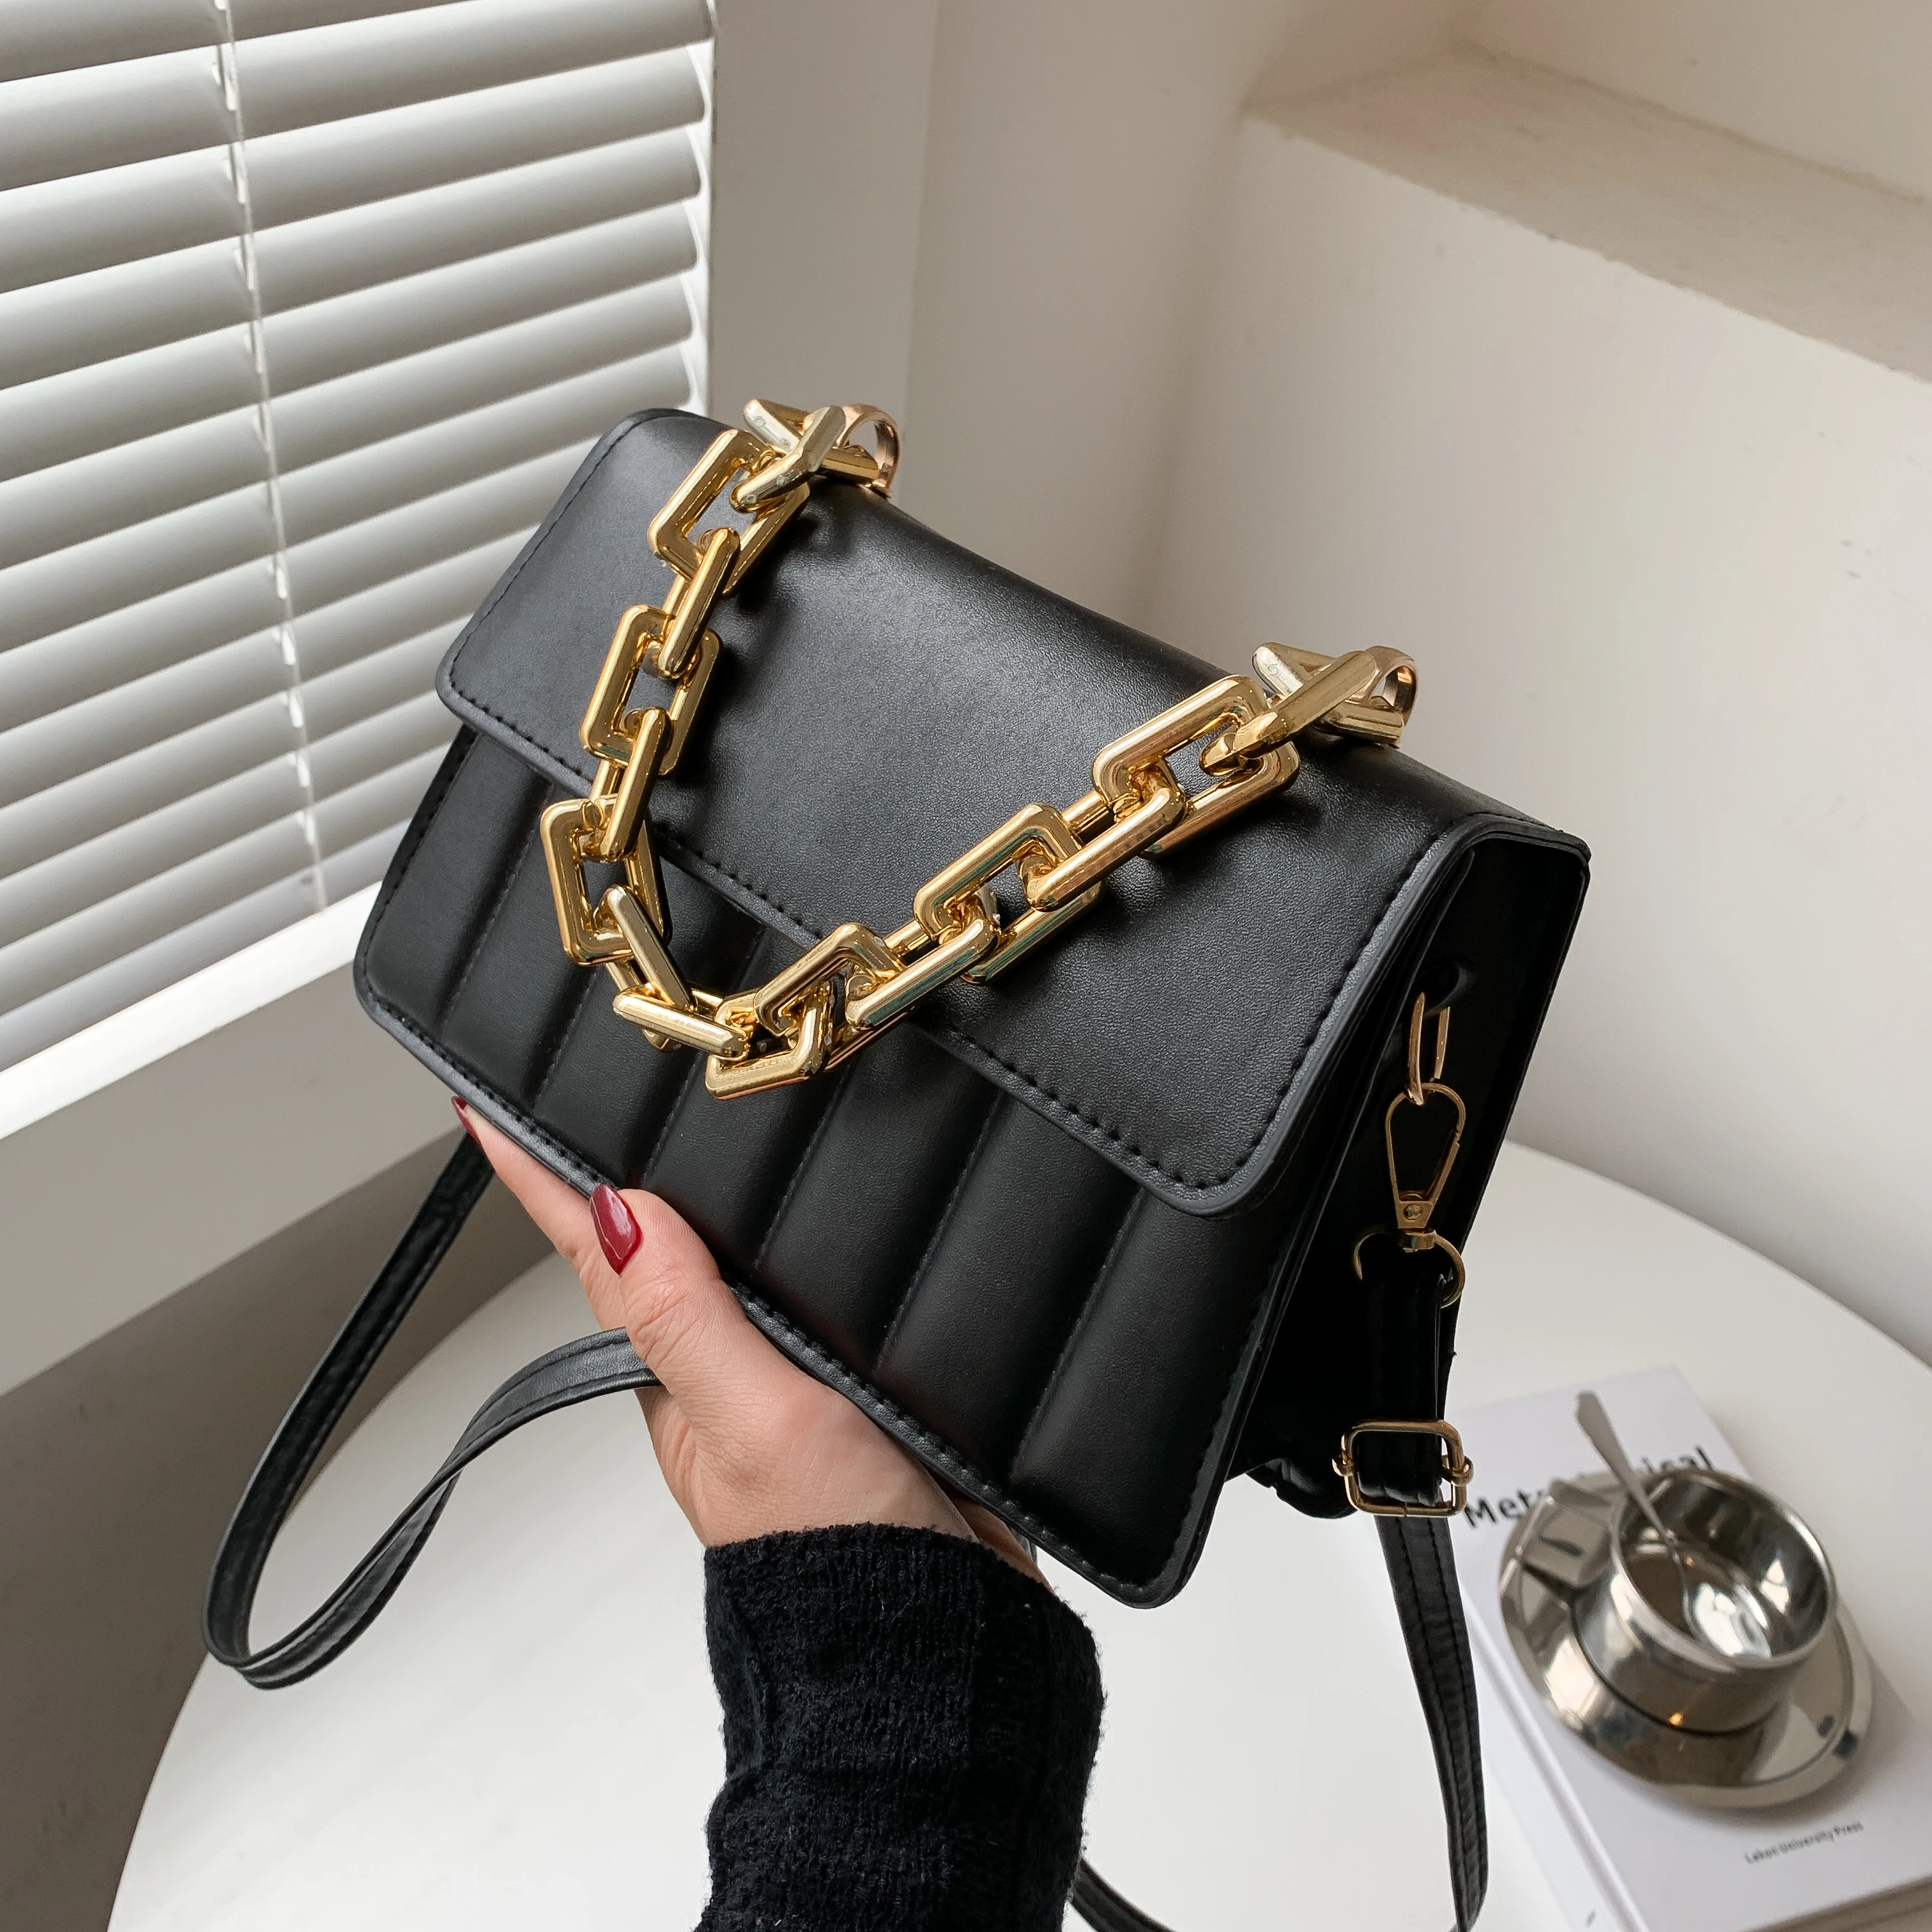 Cheap Latest Designer Ladies Purse, Clutches, Handbags, Sling Bags at  Lowest Prices - Bags Boutique - YouTube | Handbag manufacturers, Wholesale  bags, Latest bags